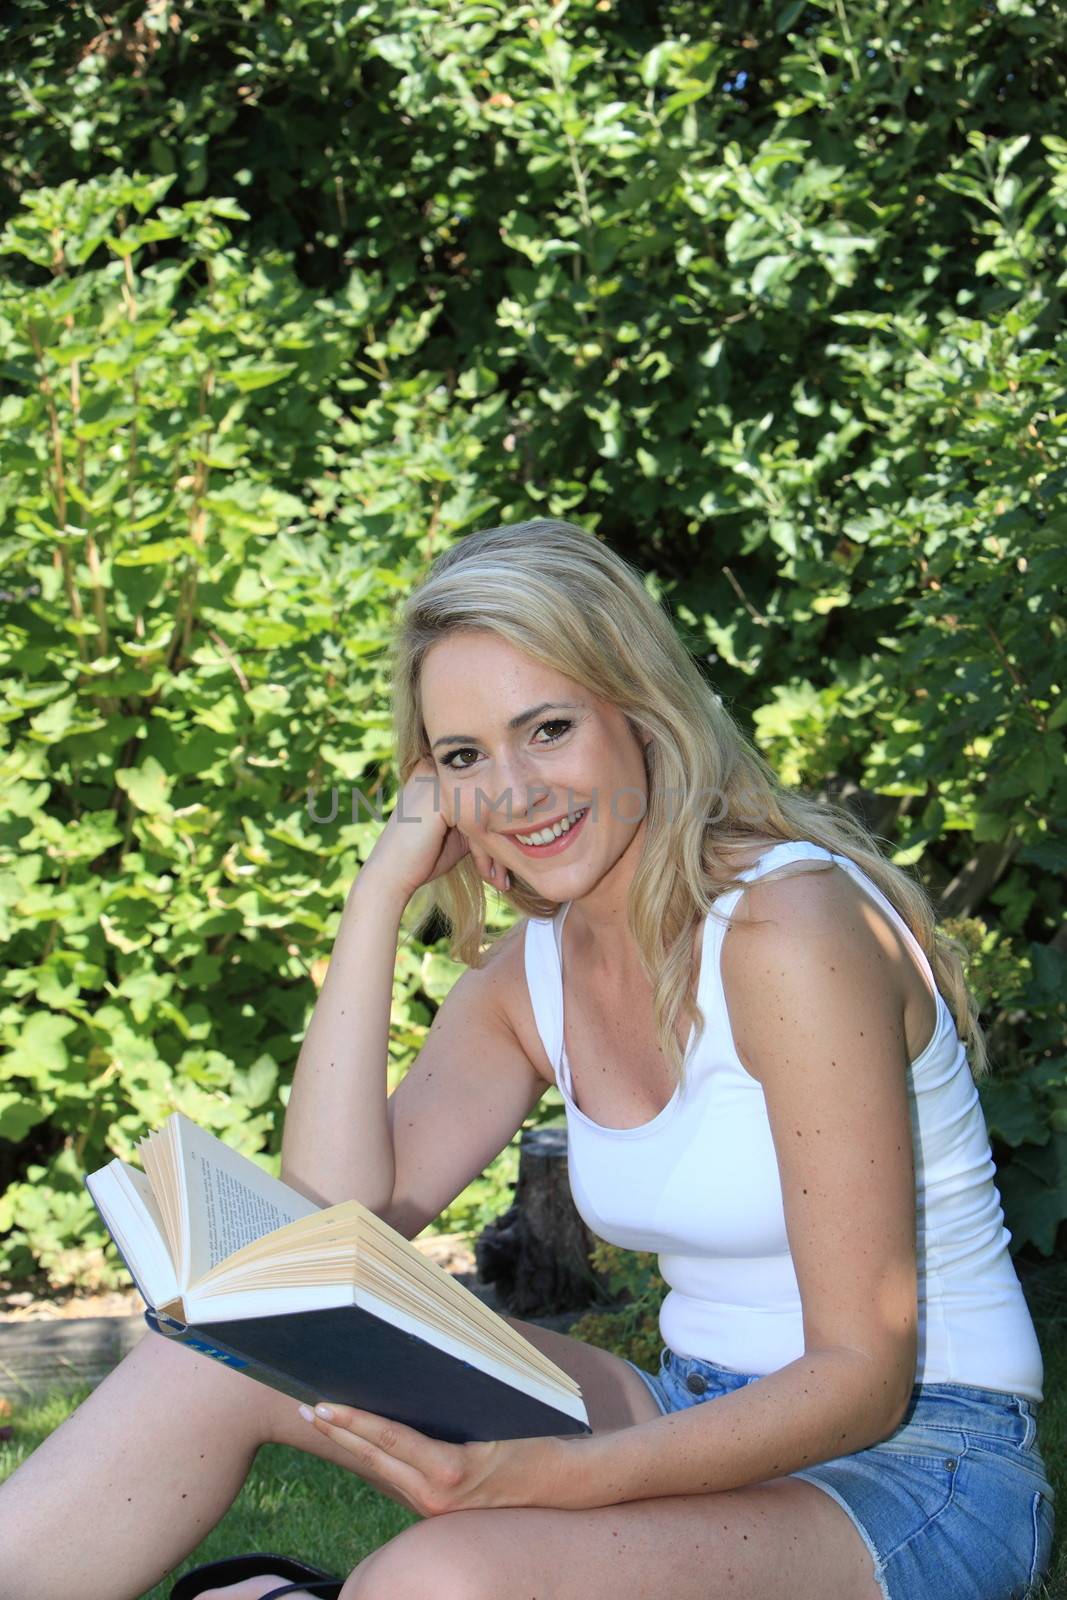 Pretty smiling young blond woman wearing summer shorts reading in the garden in the shade of a leafy green tree